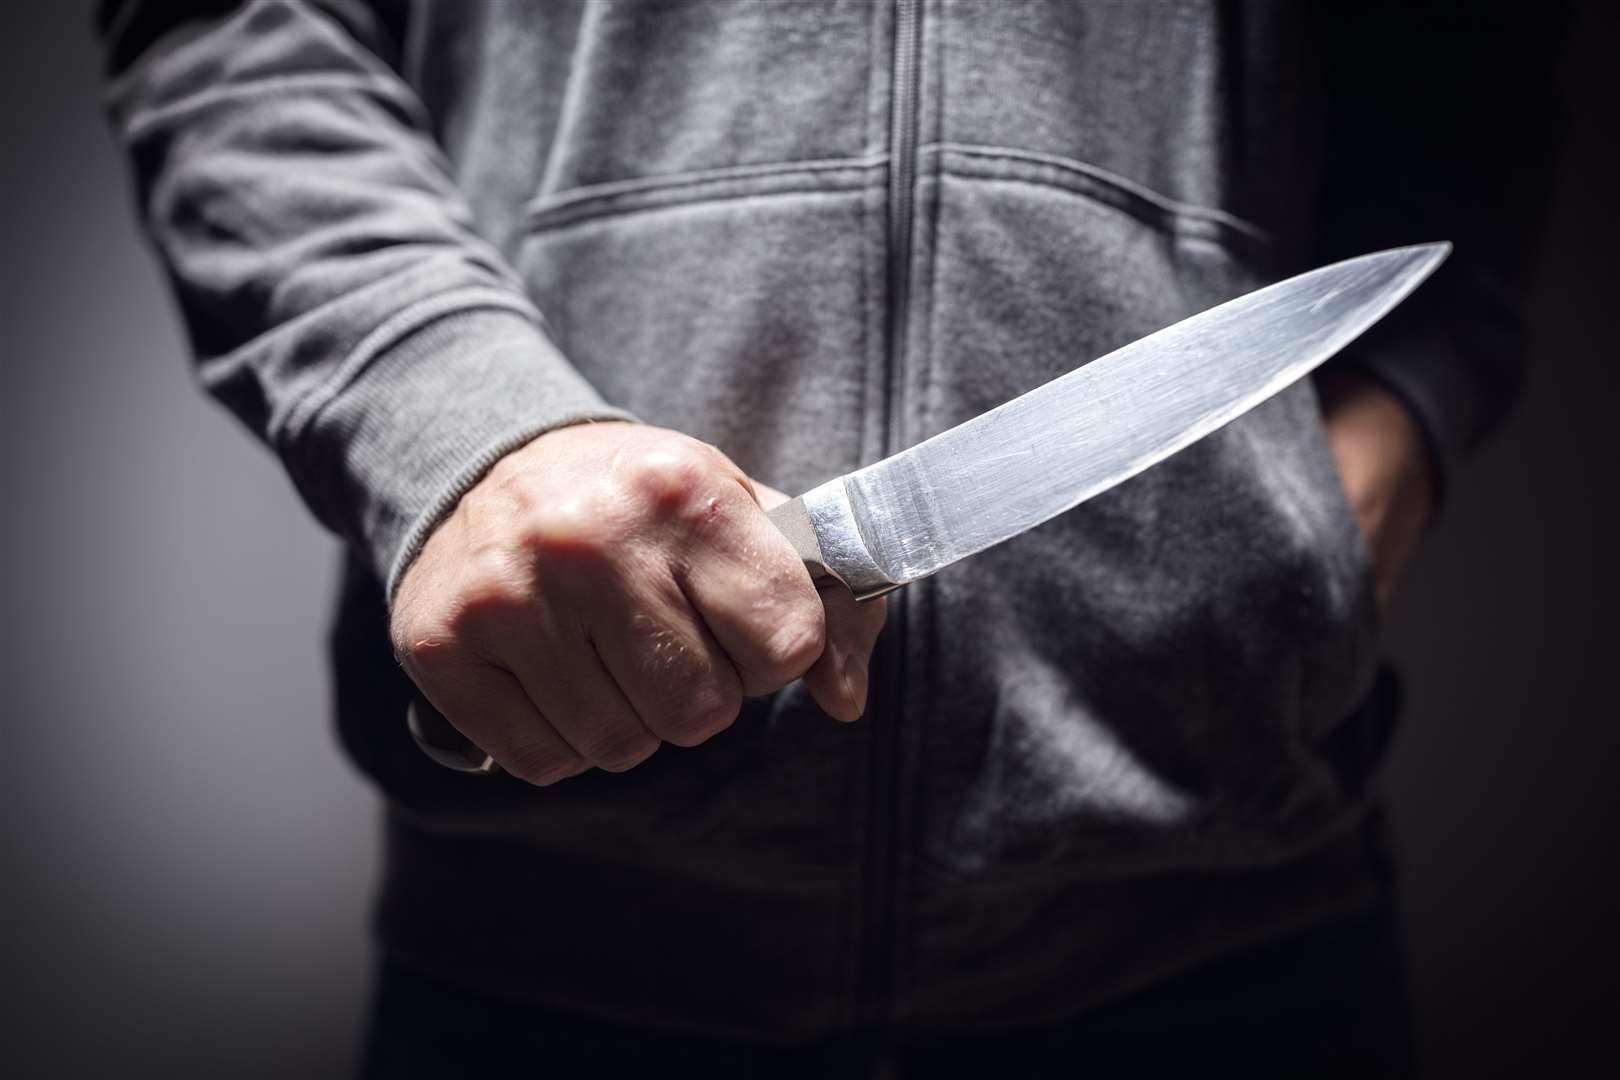 There has been 152% rise in knife crime in the county between April 2010 and September 2018.